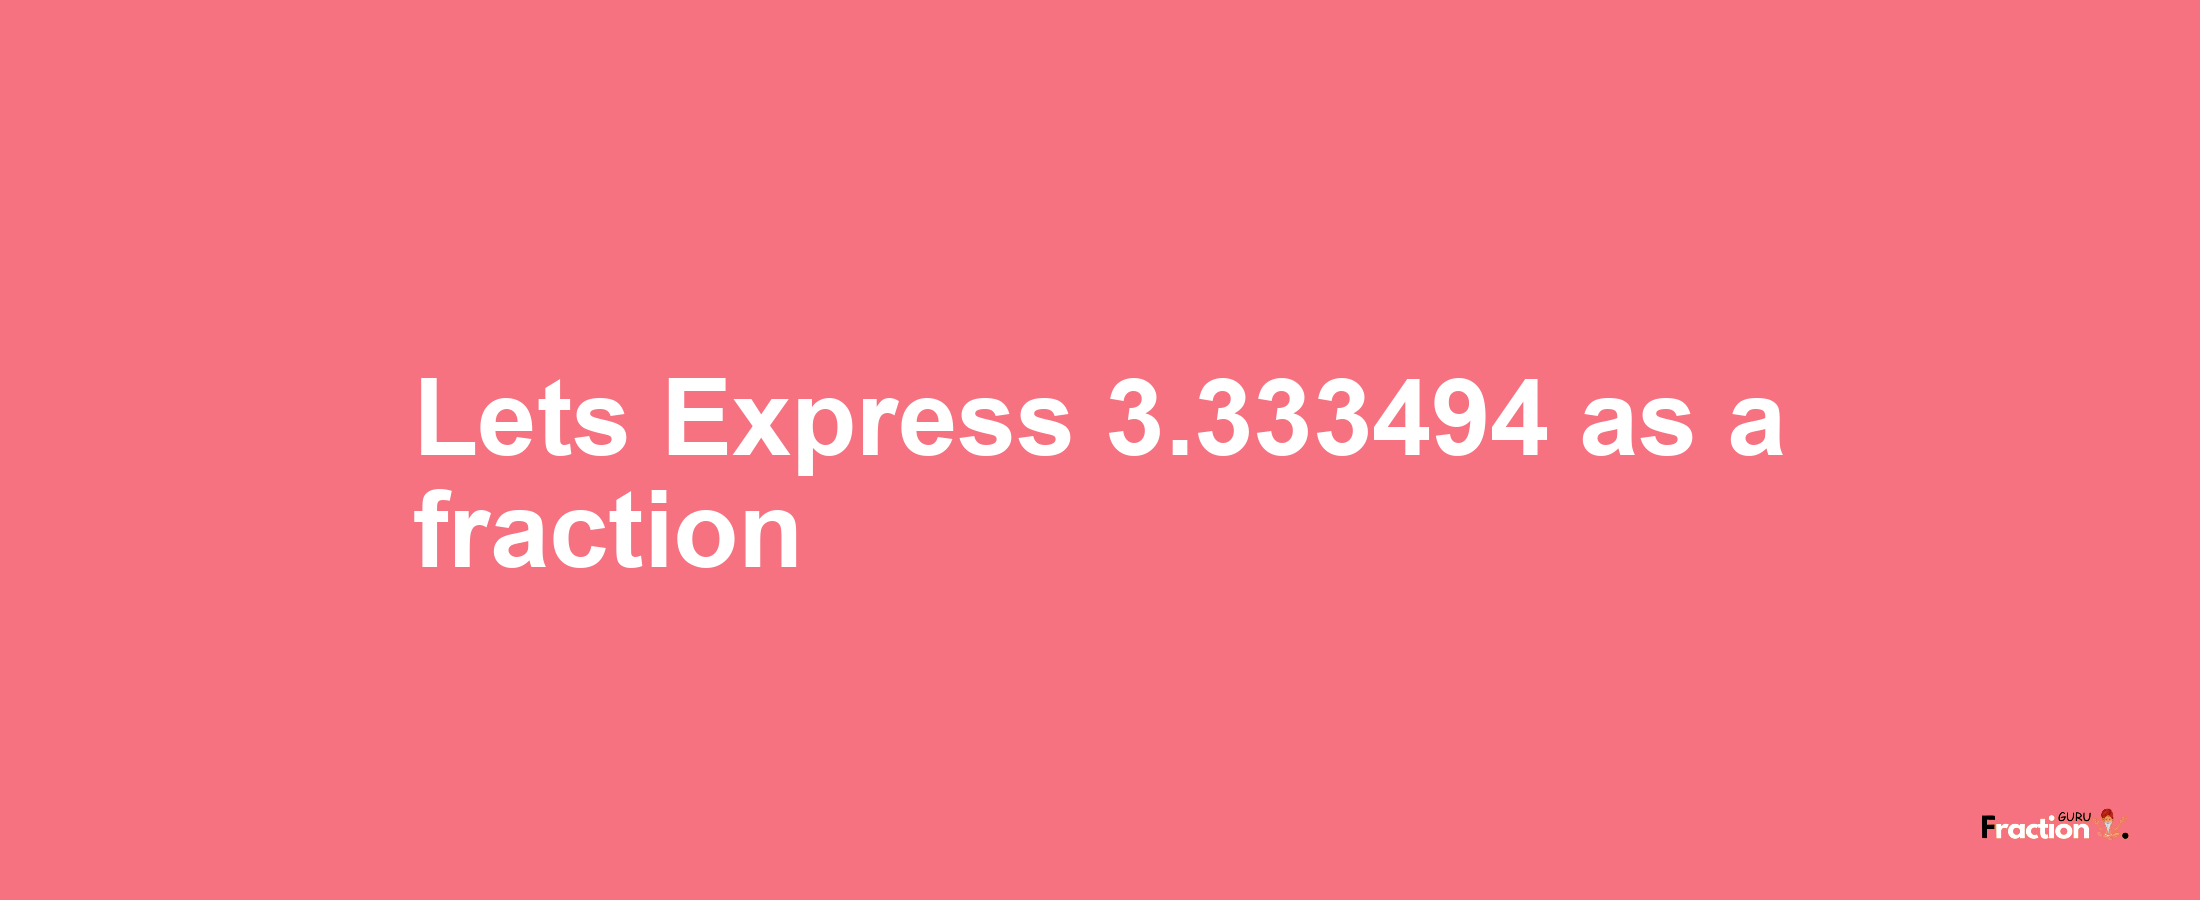 Lets Express 3.333494 as afraction